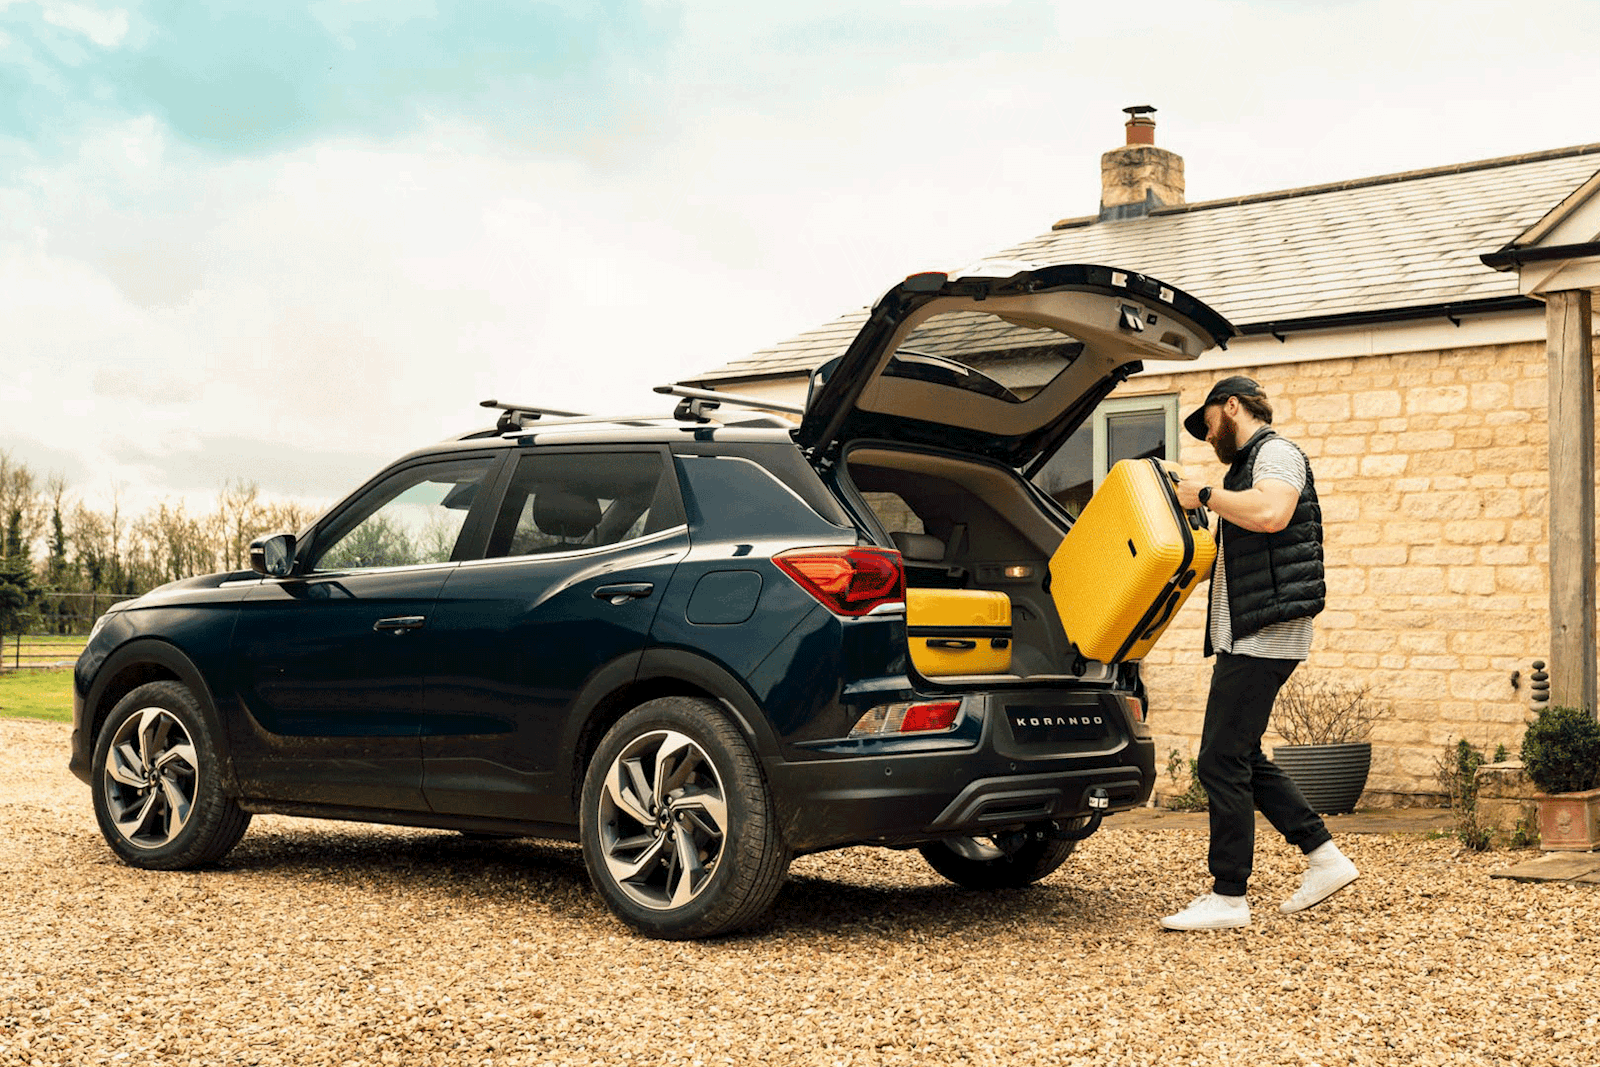 KGM Korando with man placing suit case in the boot